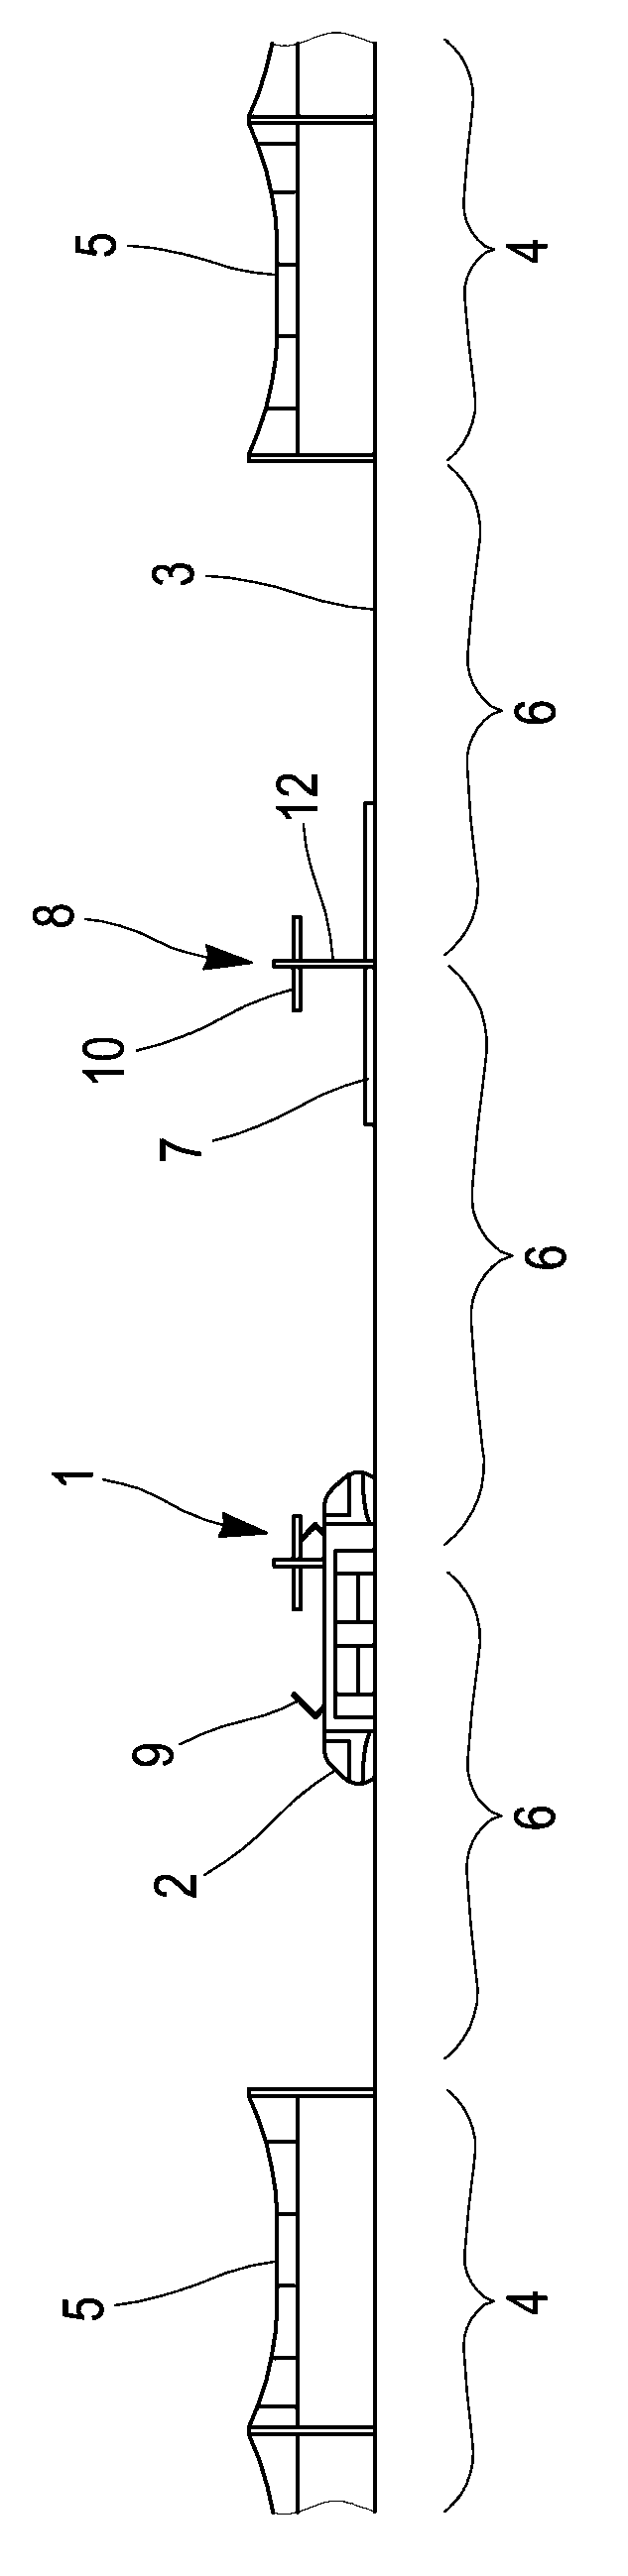 Energy recharging device for vehicle